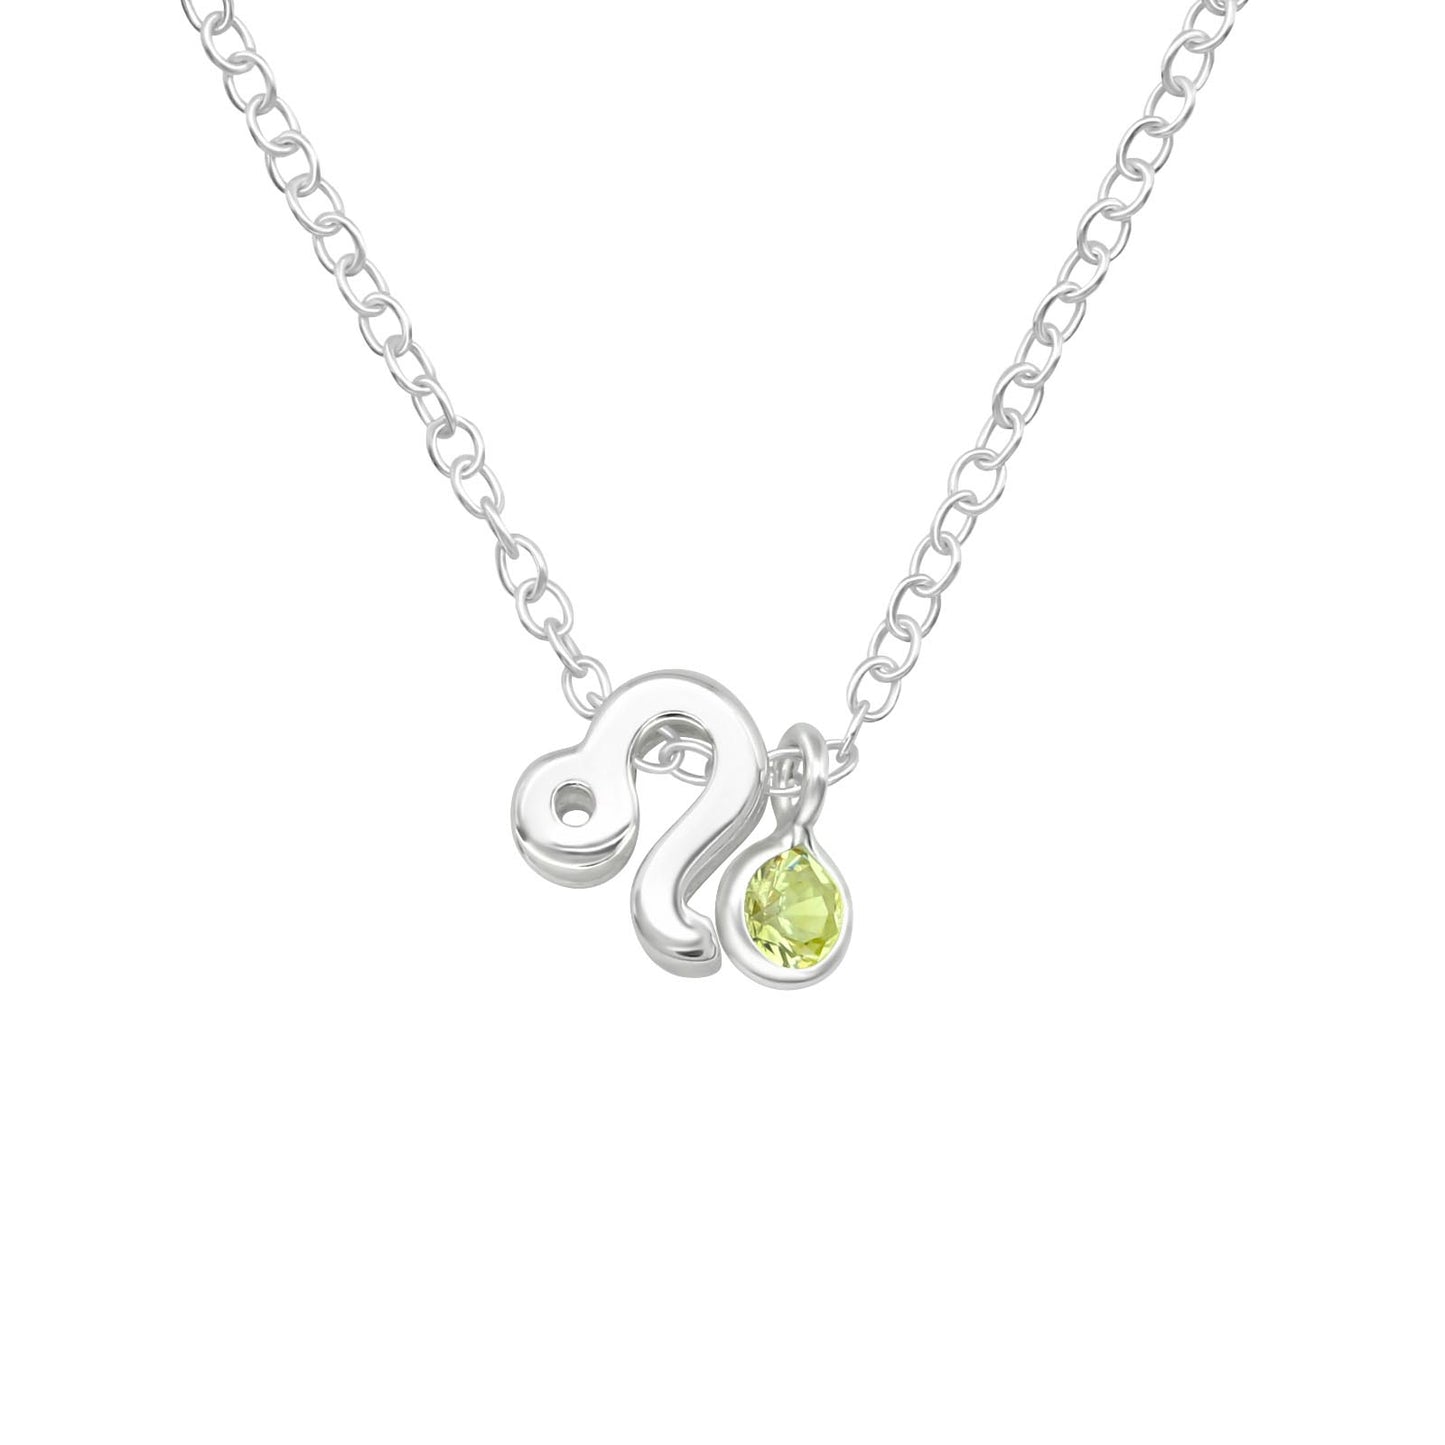 Leo Sign Pendant Necklace - Made from Sterling Silver